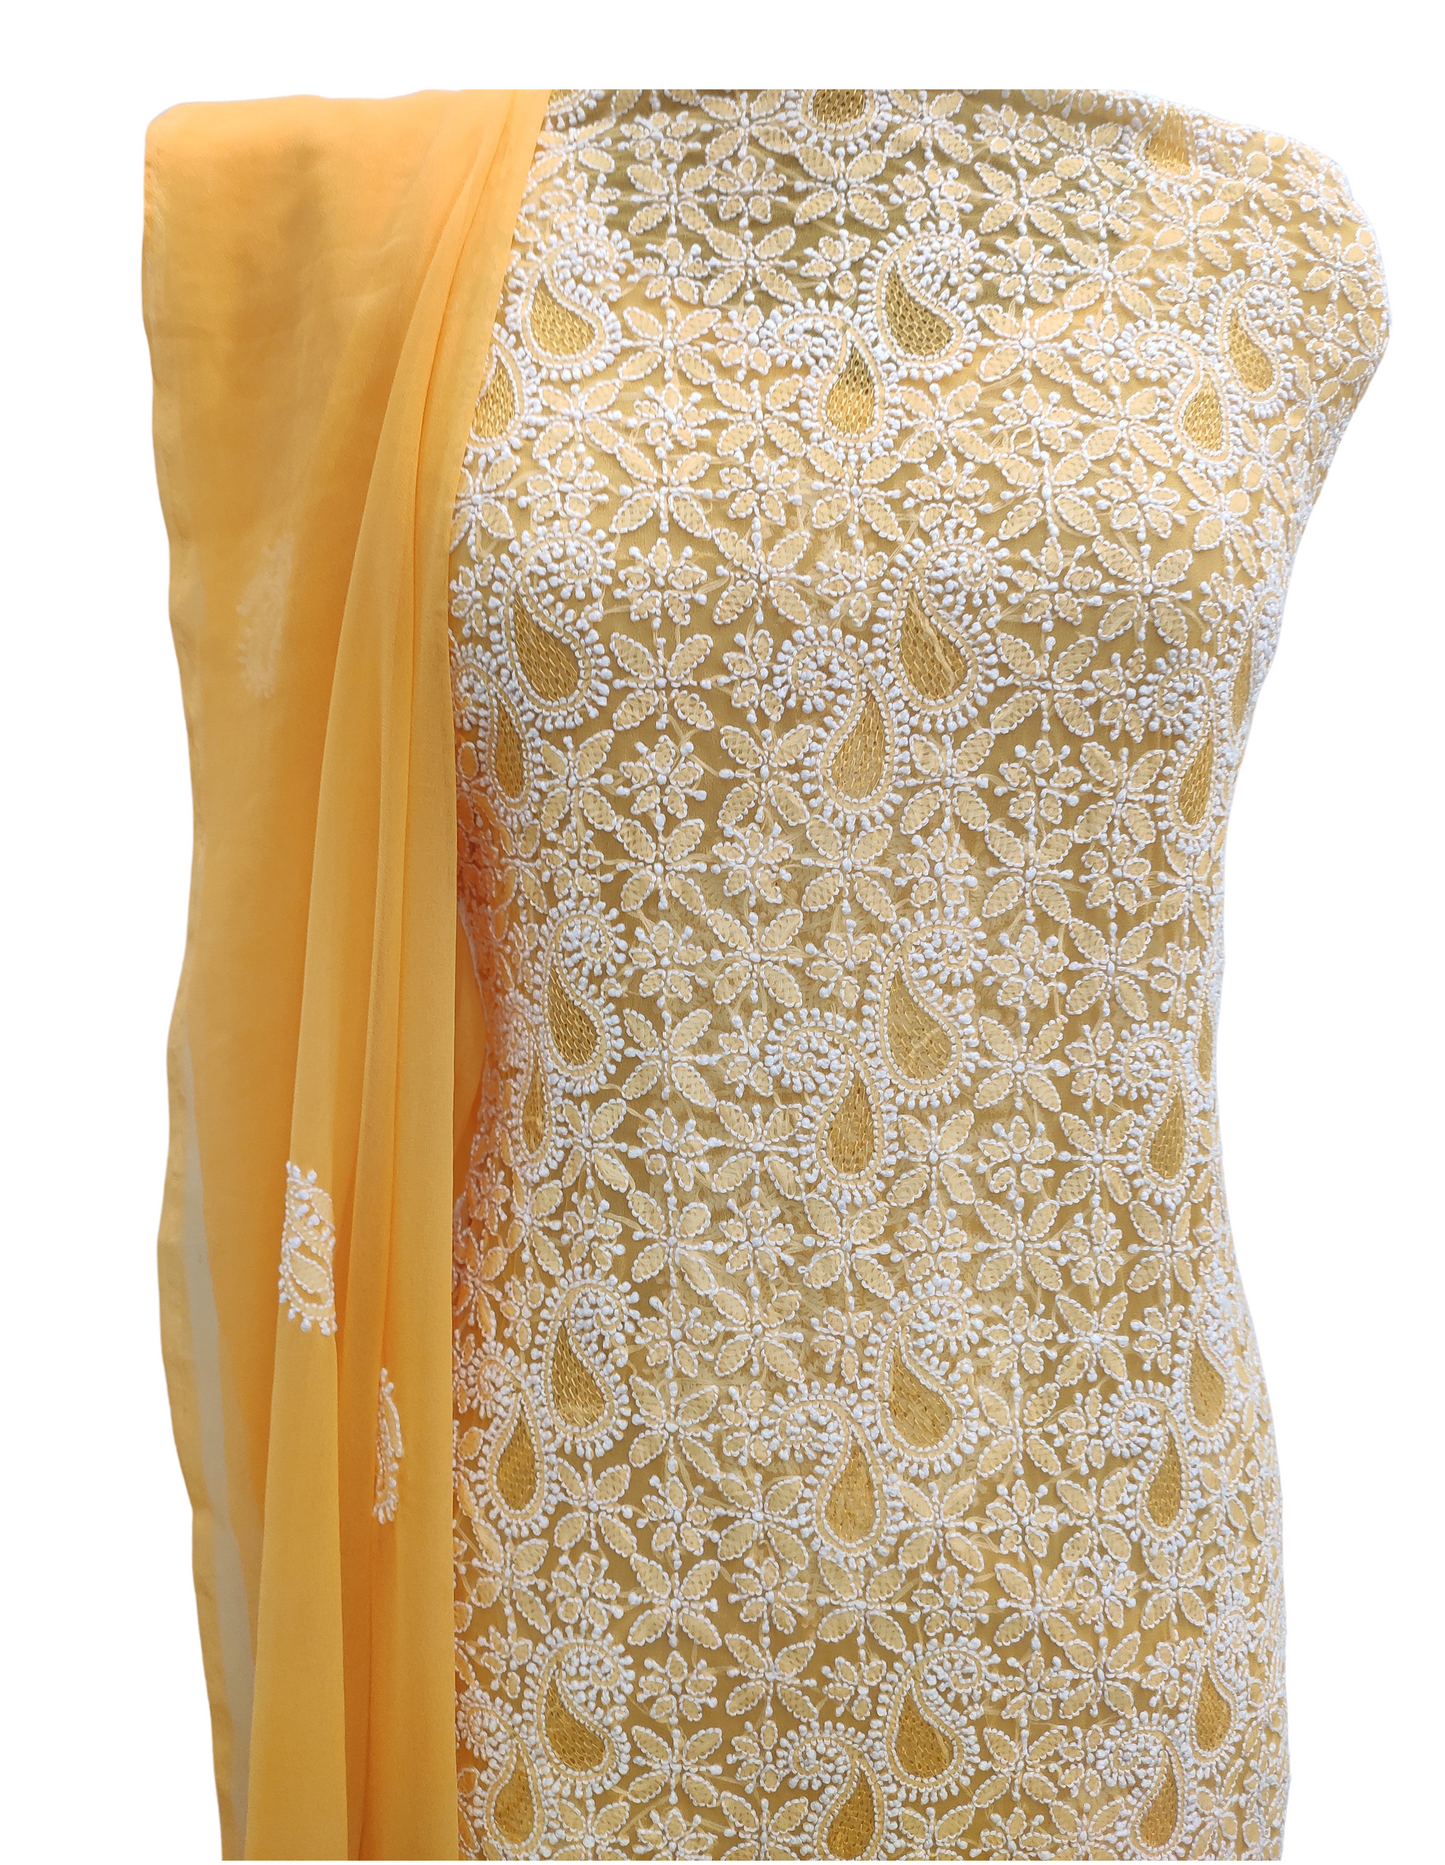 Shyamal Chikan Hand Embroidered Orange Georgette Lucknowi Chikankari Unstitched Suit Piece With Jaali Work - S10717 - Shyamal Chikan